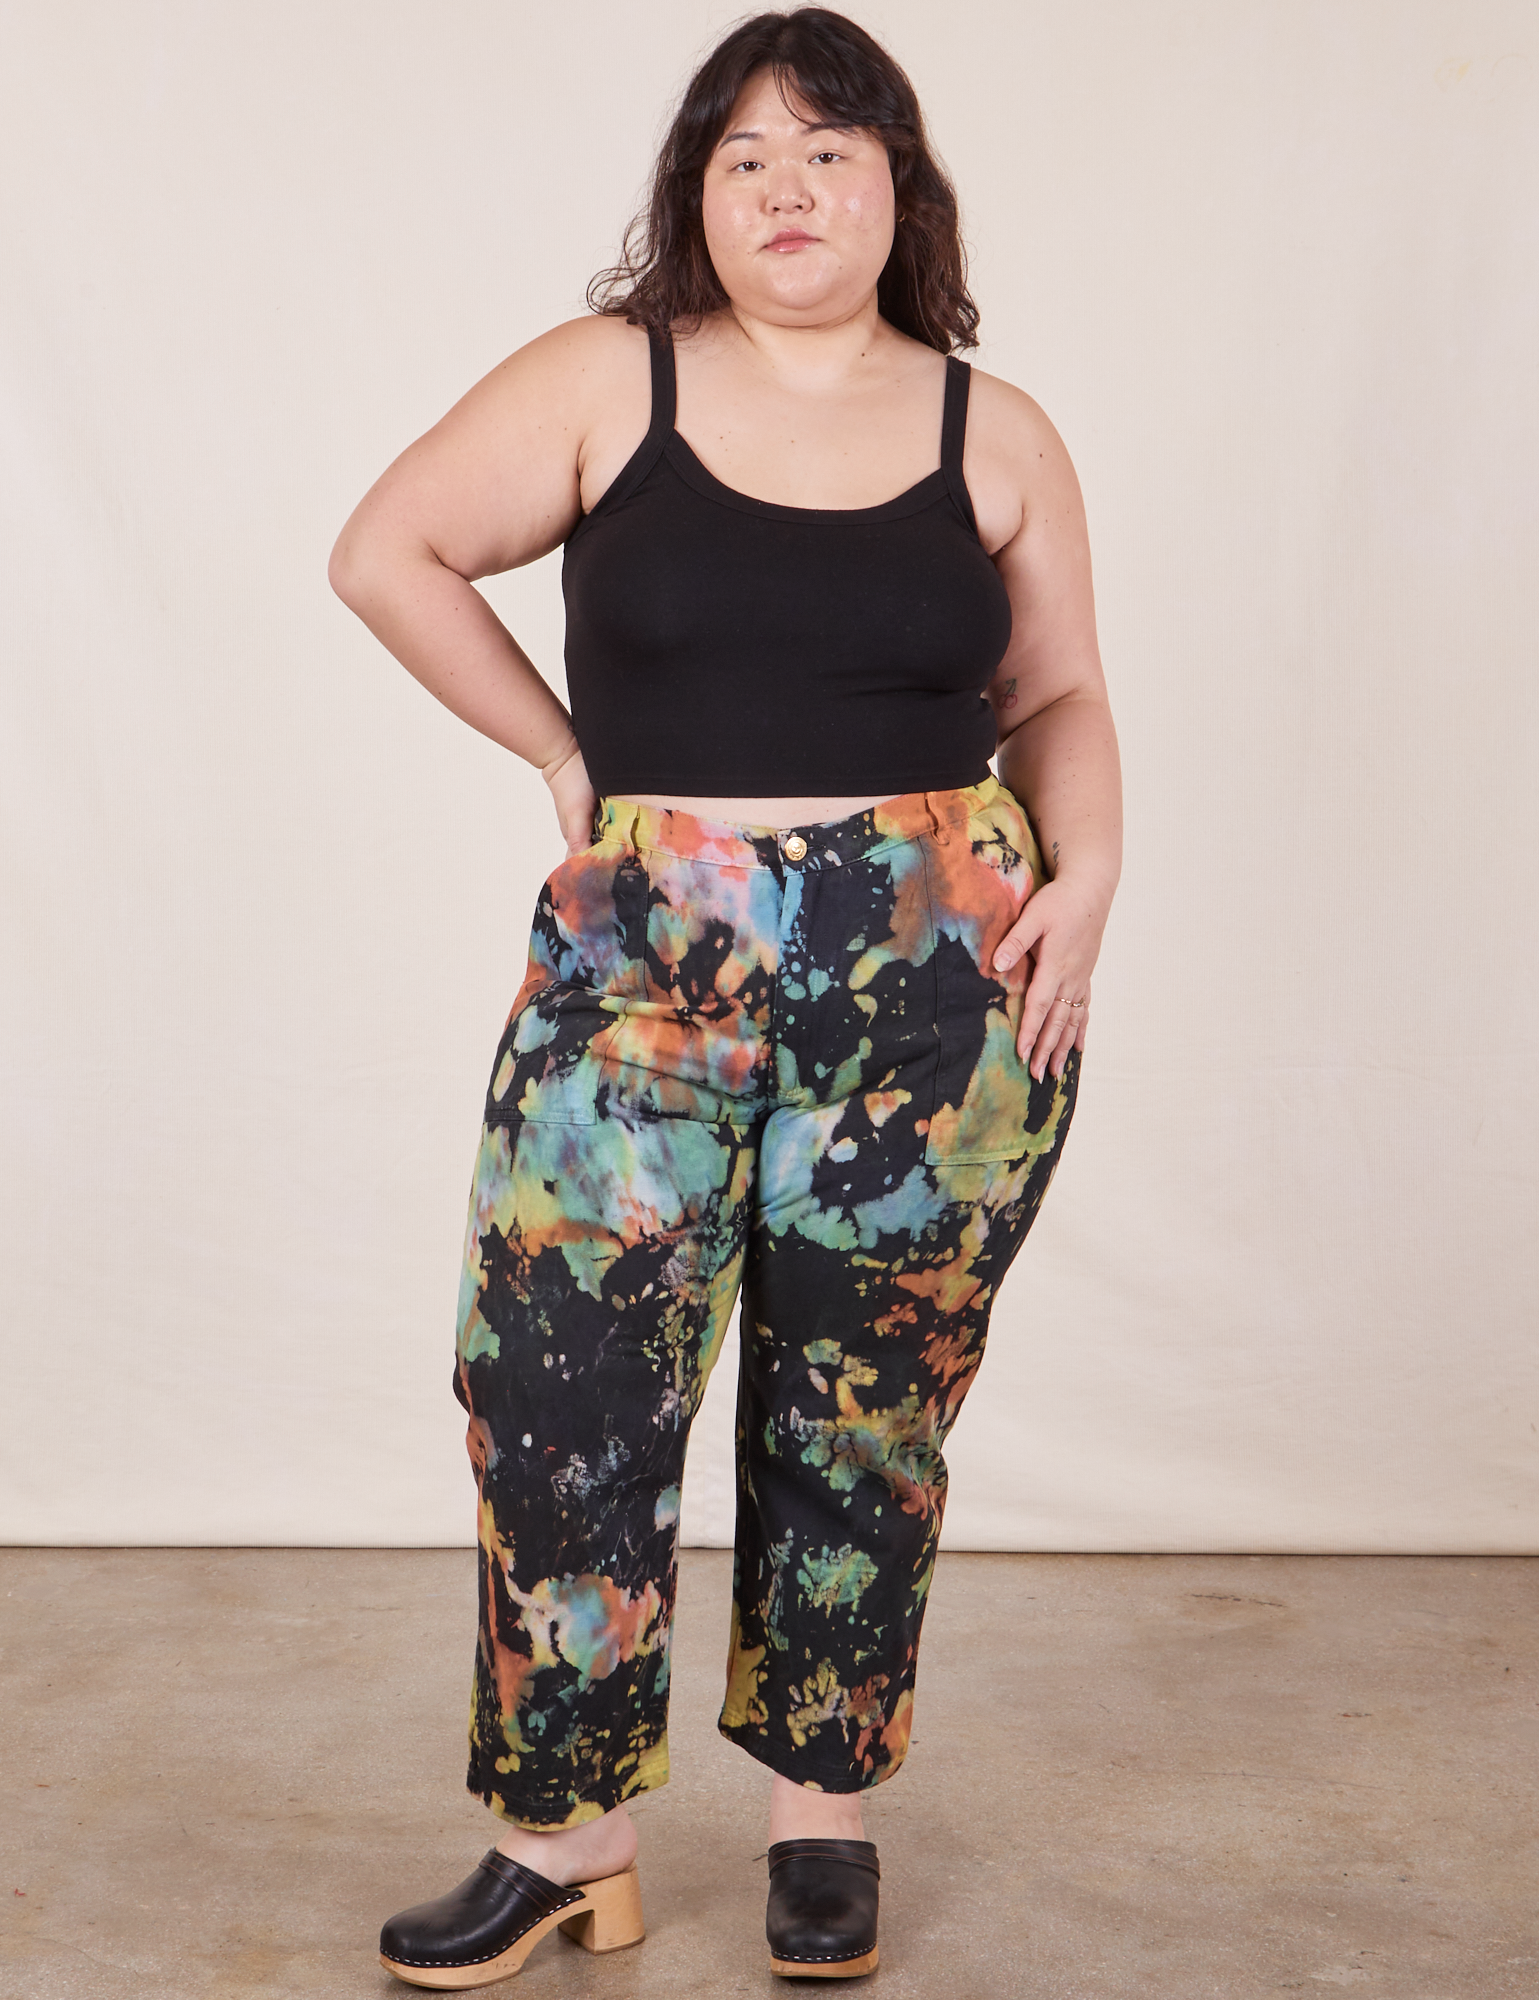 Ashley is 5&#39;7&quot; and wearing 1XL Petite Rainbow Magic Waters Work Pants paired with black Cropped Cami